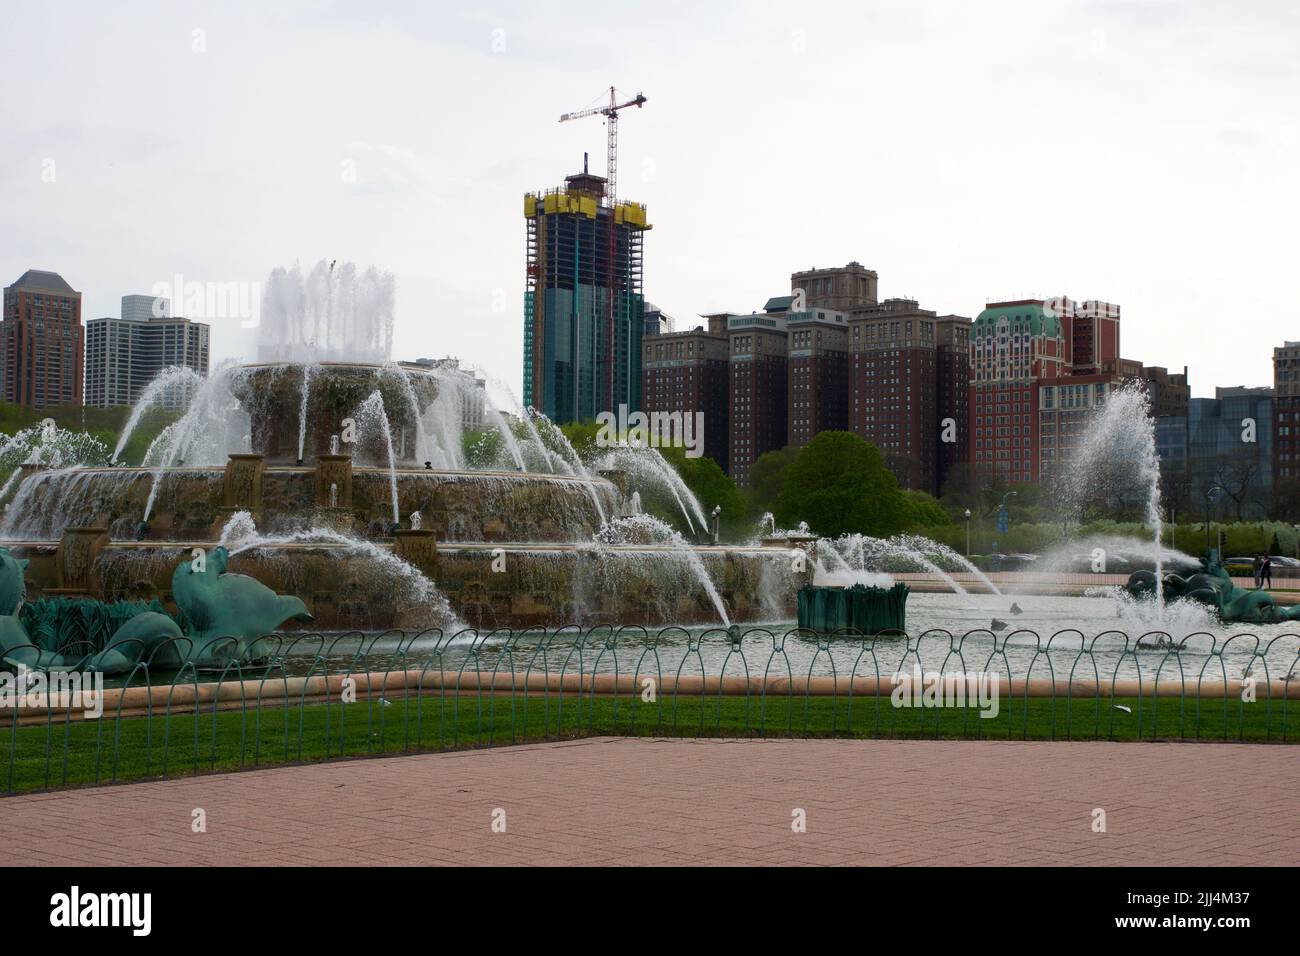 CHICAGO, ILLINOIS, UNITED STATES - May 12, 2018: Buckingham Fountain is a 3-tiered fountain with light and water shows in Grant Park, built in 1927 Stock Photo